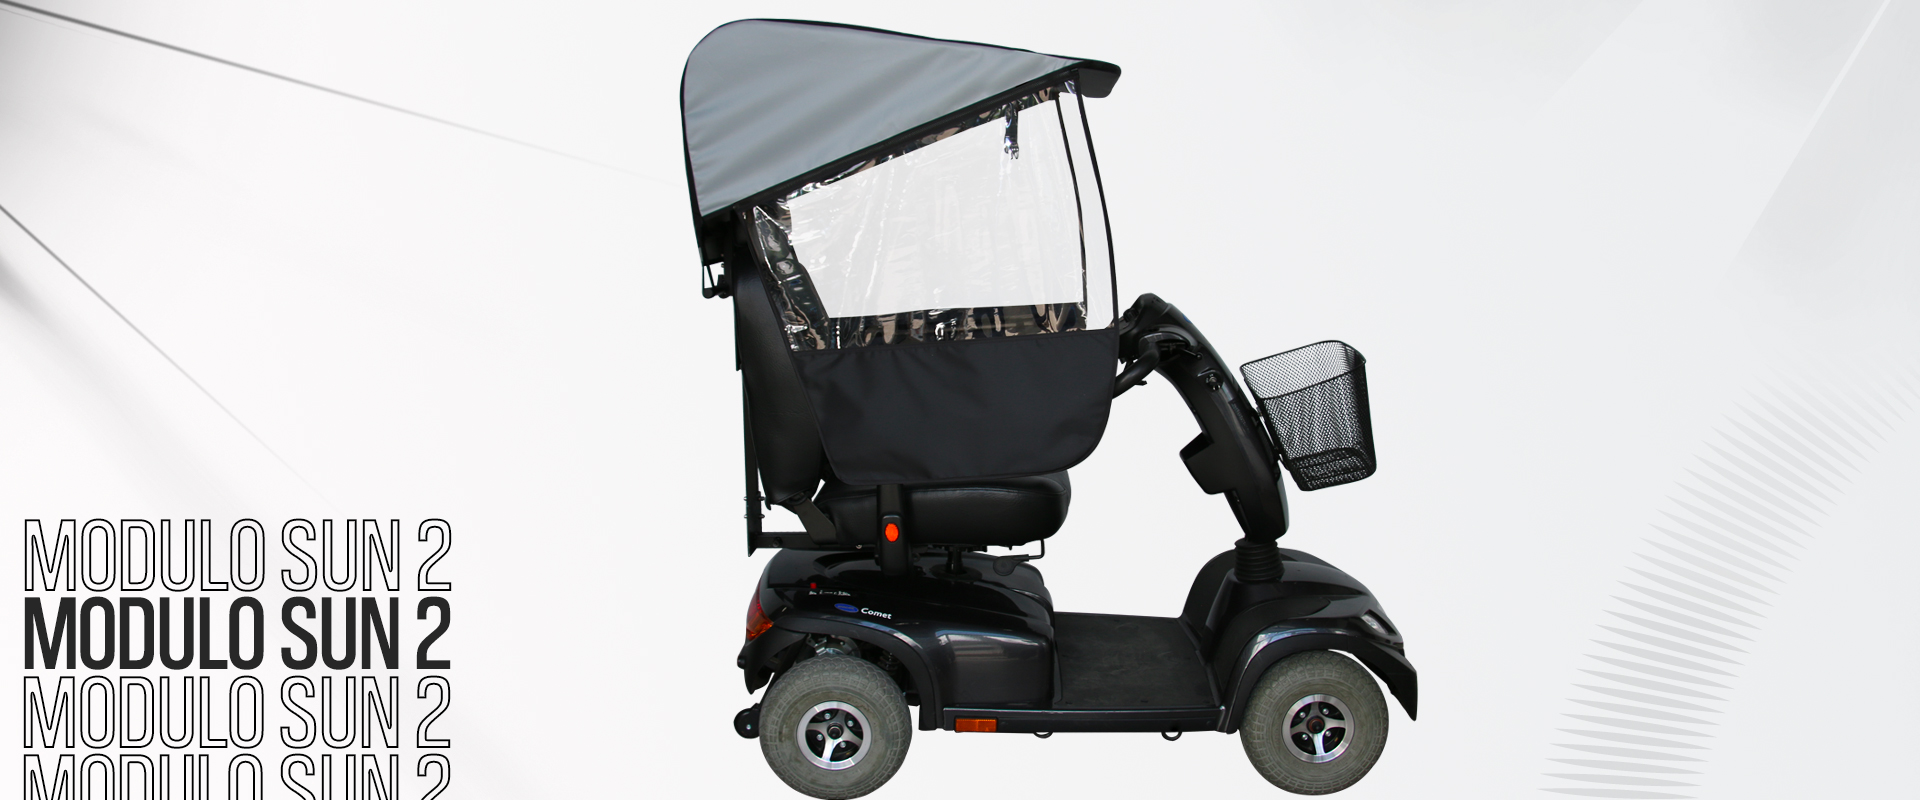 veltop-modulo-2-sun-protection-for-mobility-scooter-2022-2